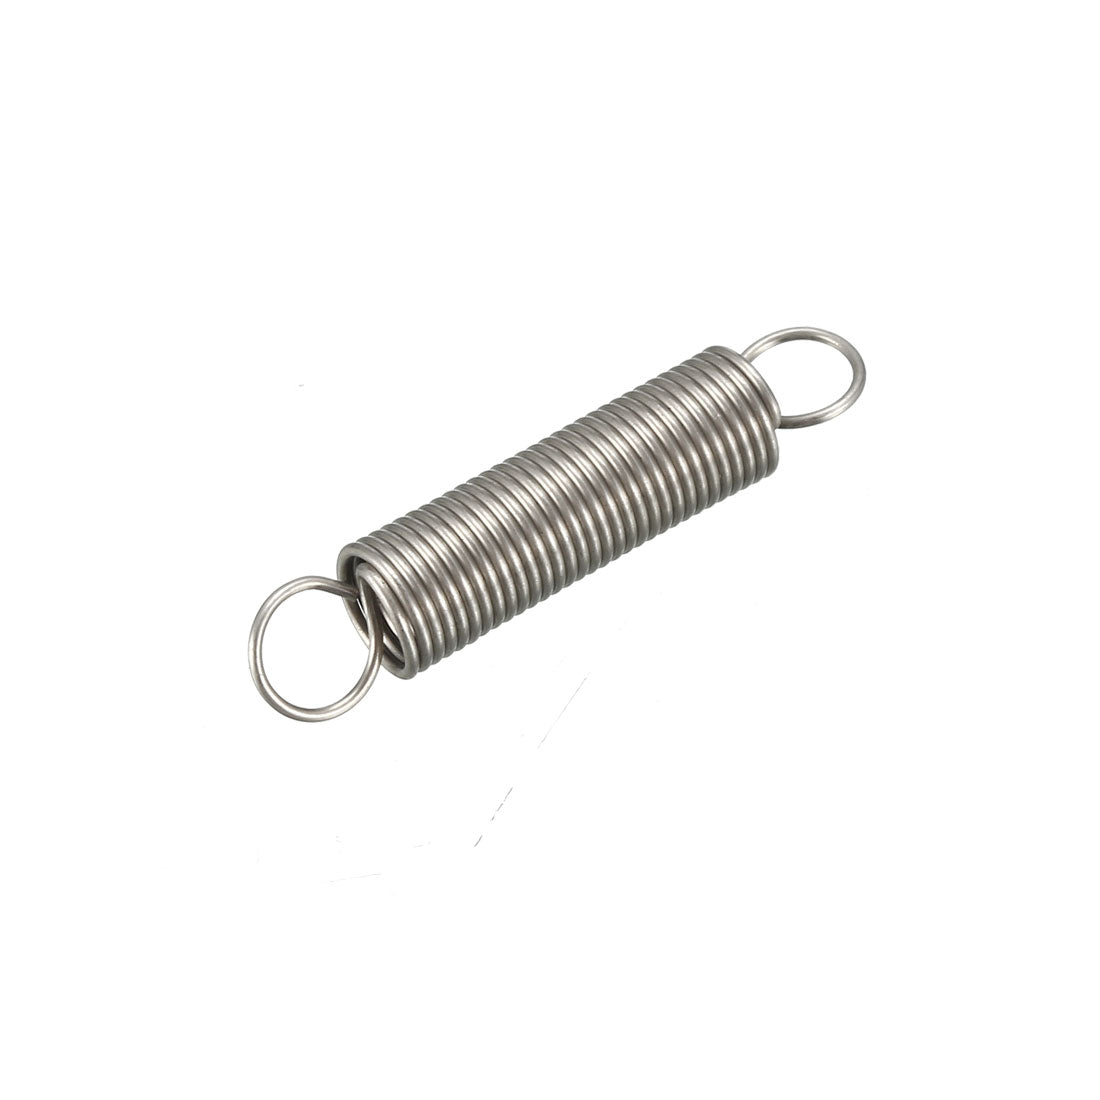 uxcell Uxcell Extended Tension Spring Wire Diameter 0.02", OD 0.2", Free Length 0.98" 5pcs